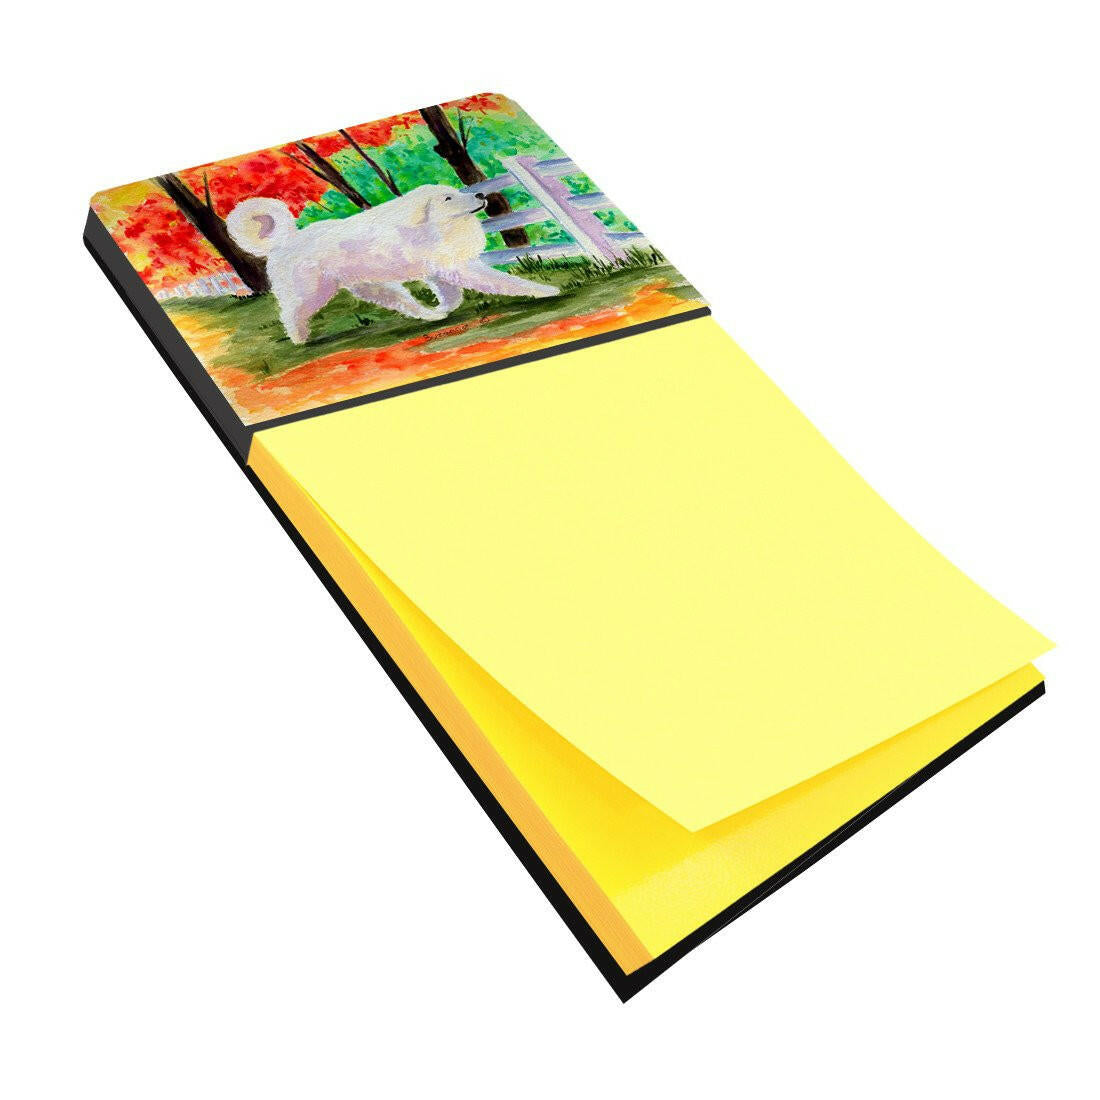 Great Pyrenees Refiillable Sticky Note Holder or Postit Note Dispenser SS8472SN by Caroline's Treasures